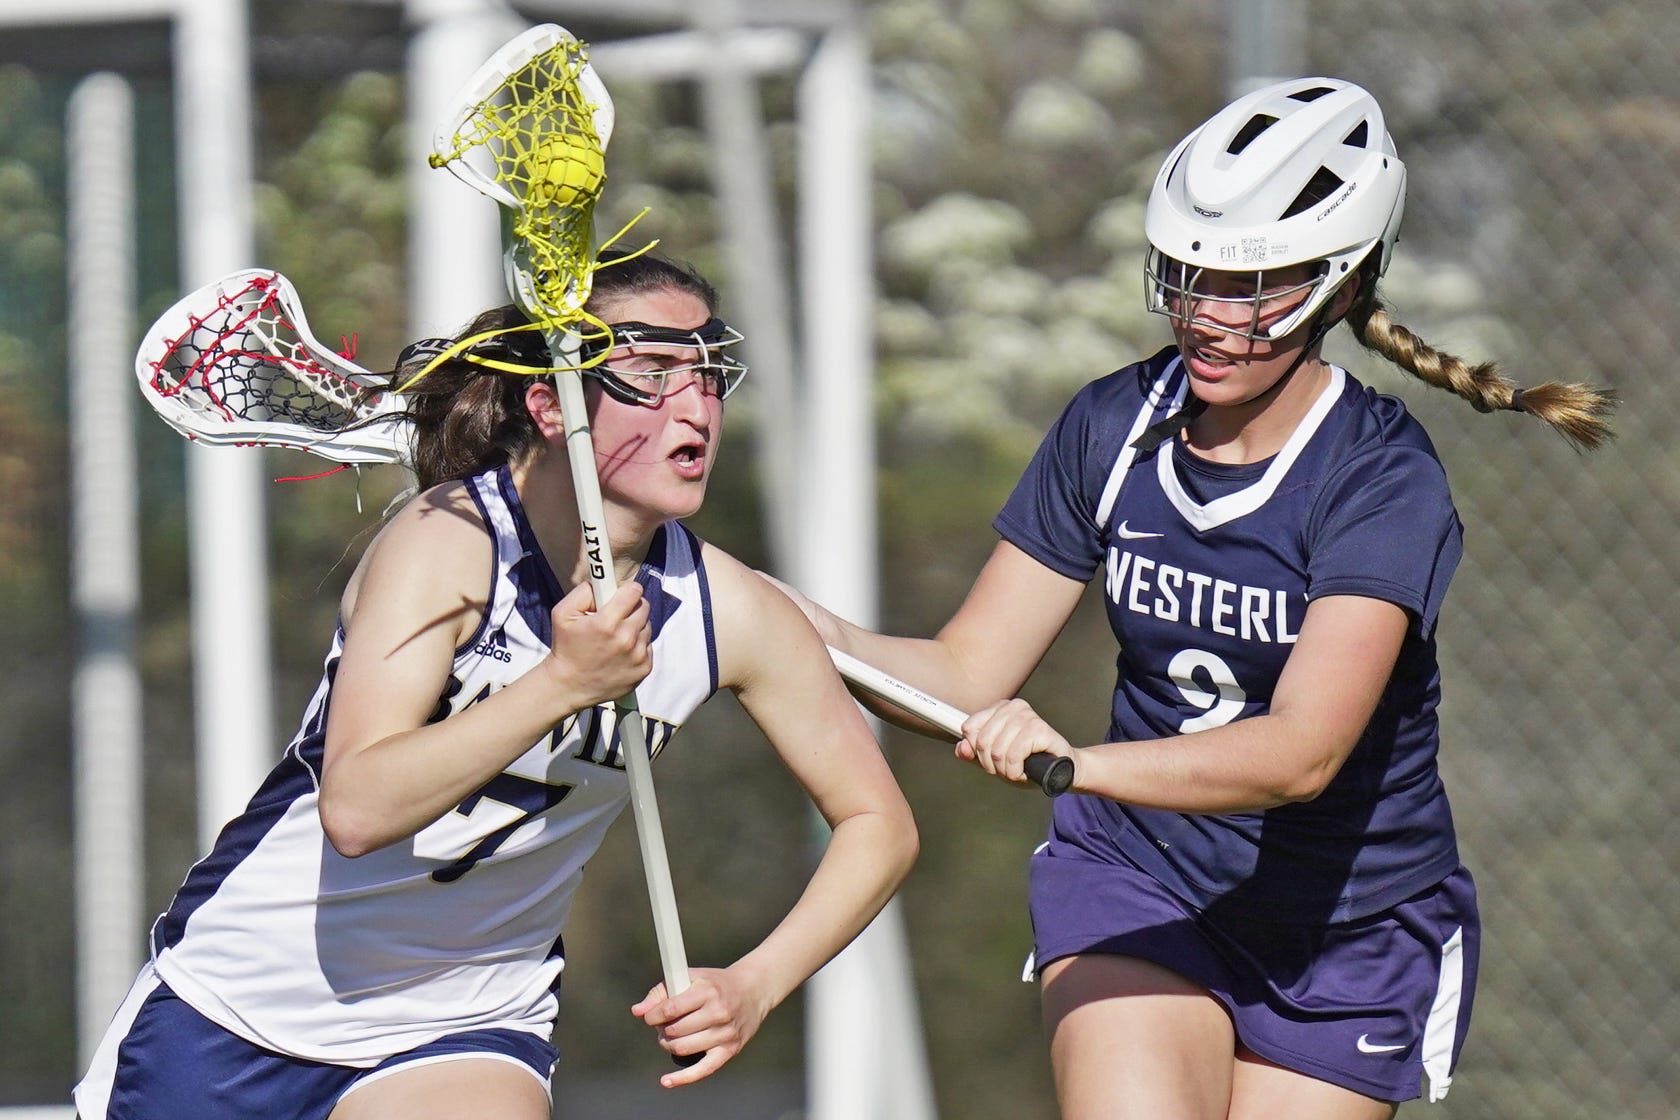 Is the drama gone for the girls lax playoffs? Eric Rueb talks about it in this week's power ranks